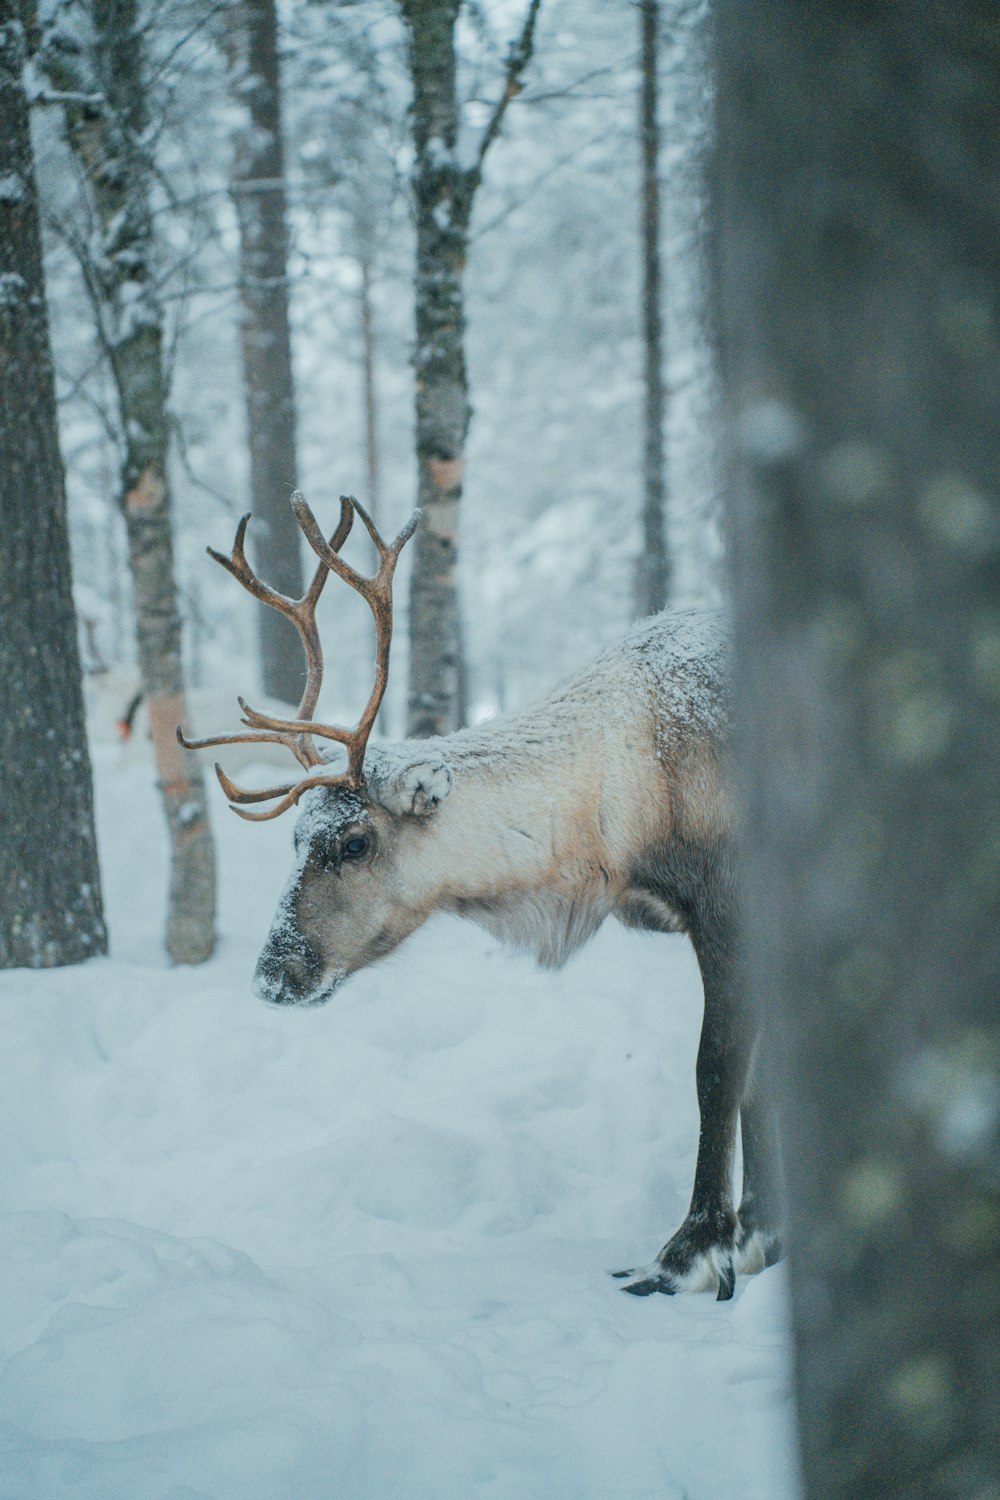 a reindeer is standing in the snow near some trees